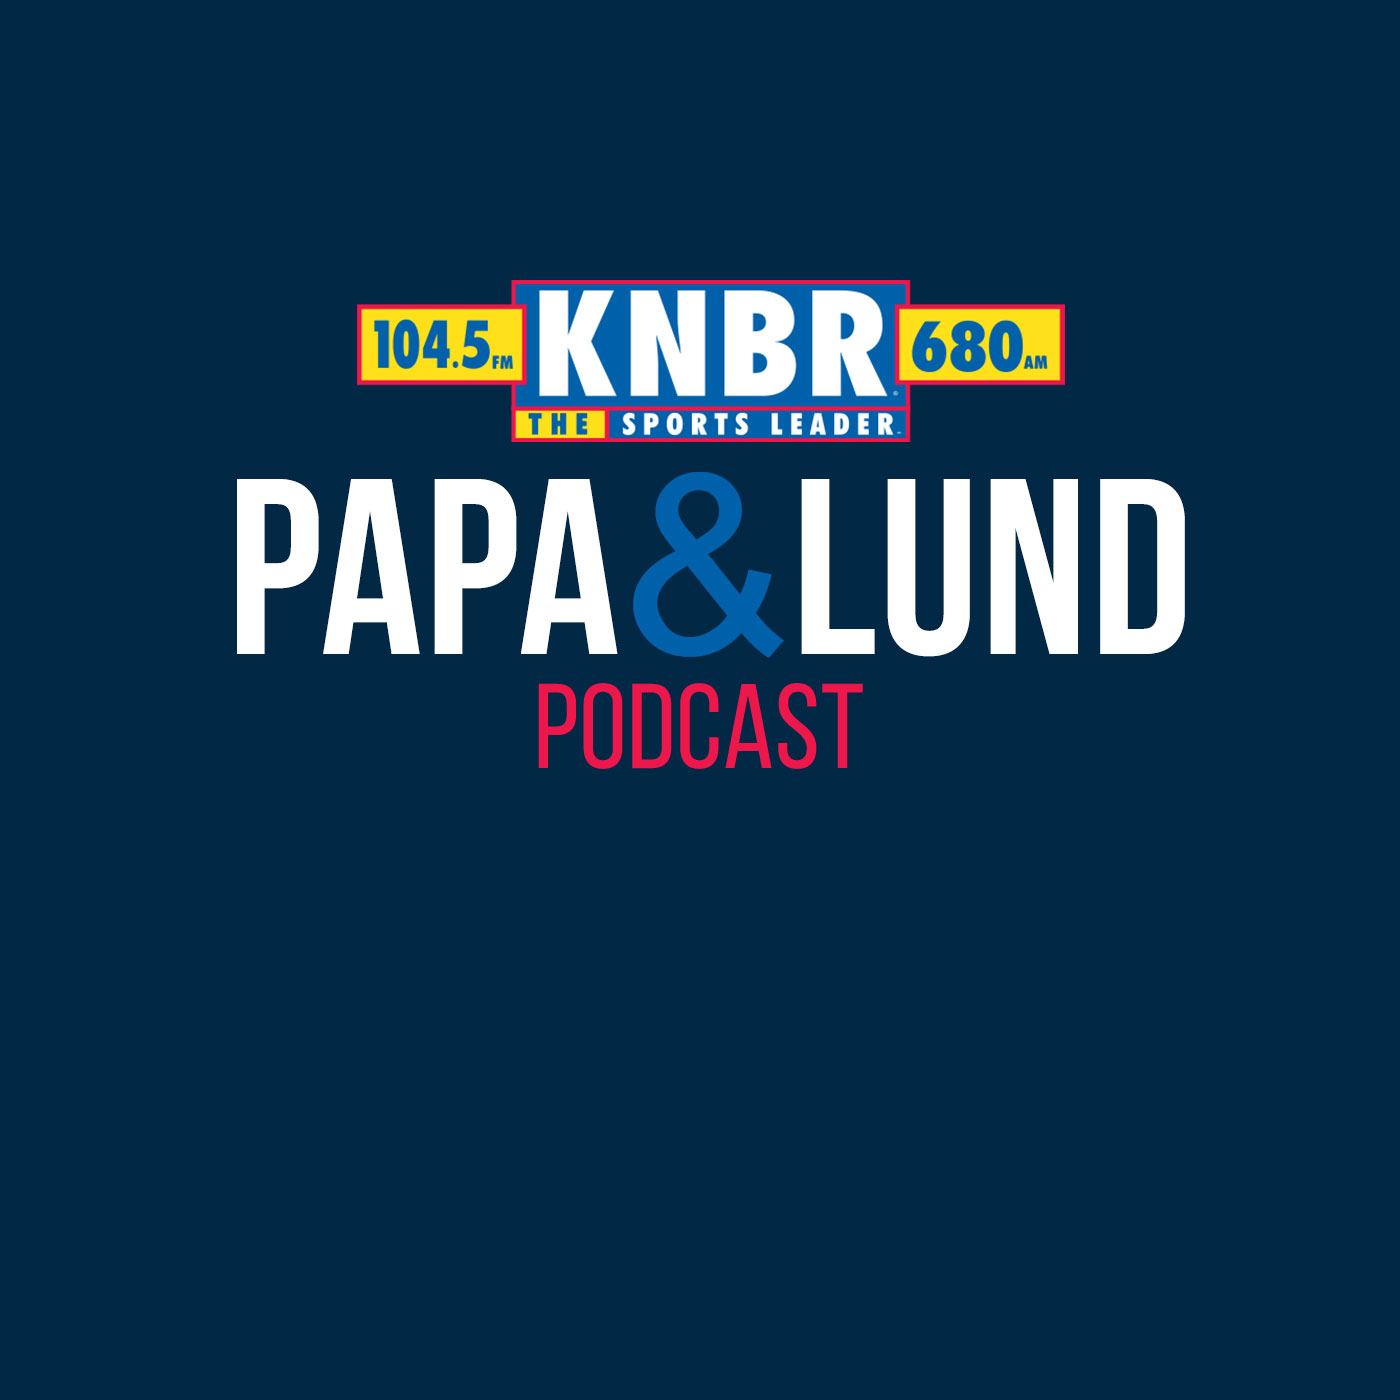 10-17 Noah Eagle joins Papa & Lund to discuss another 49ers tough loss as the injuries continue to pile up